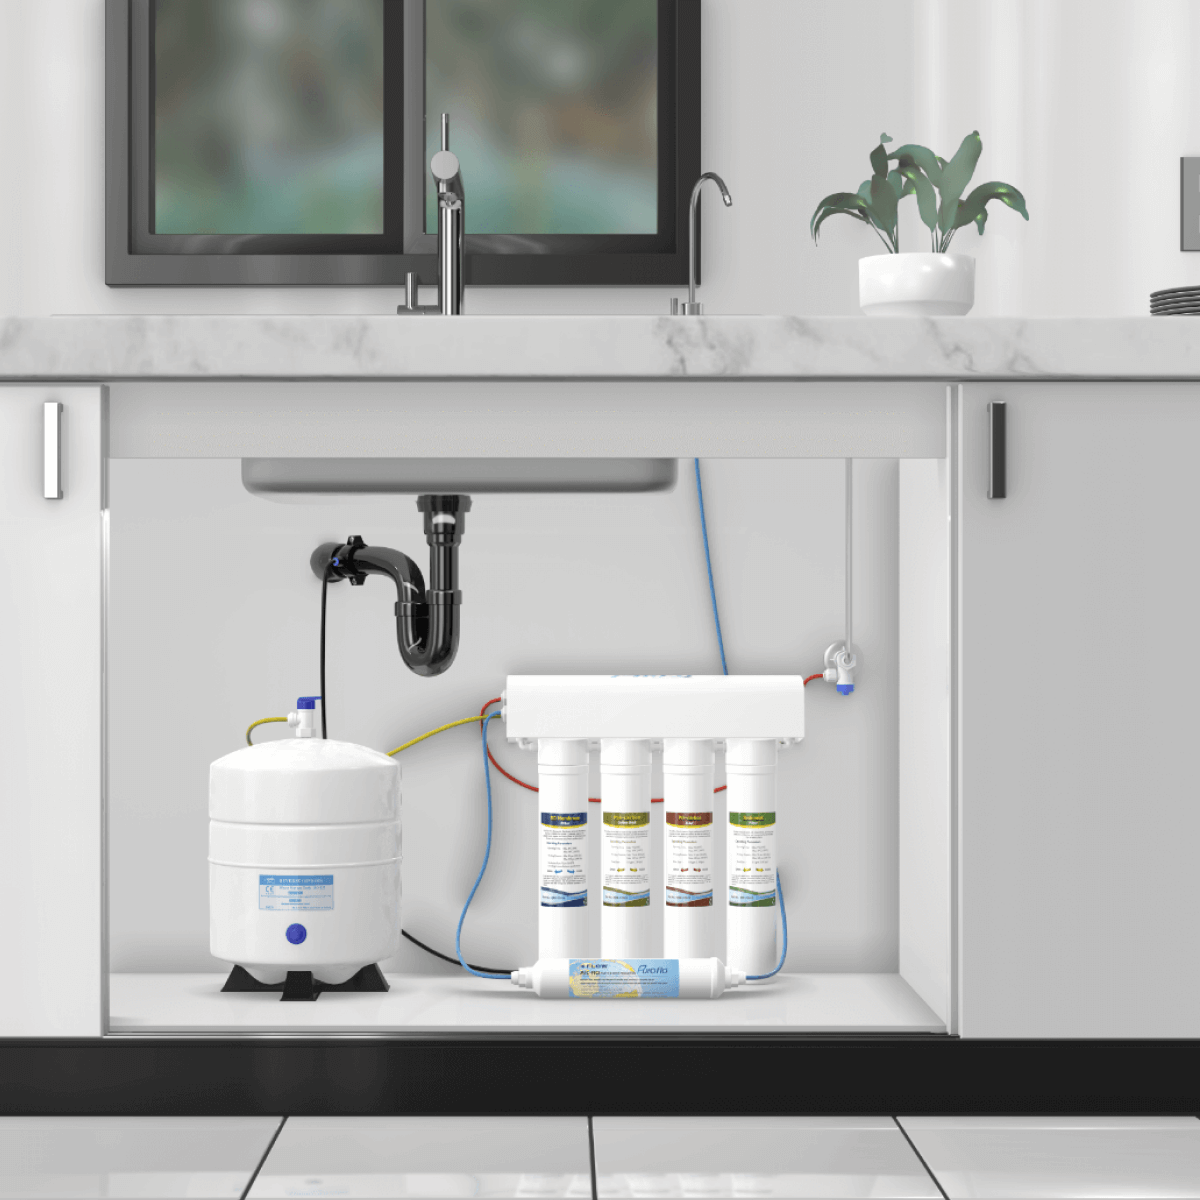 Puroflo ProQ-550 Reverse Osmosis Water Filtration System